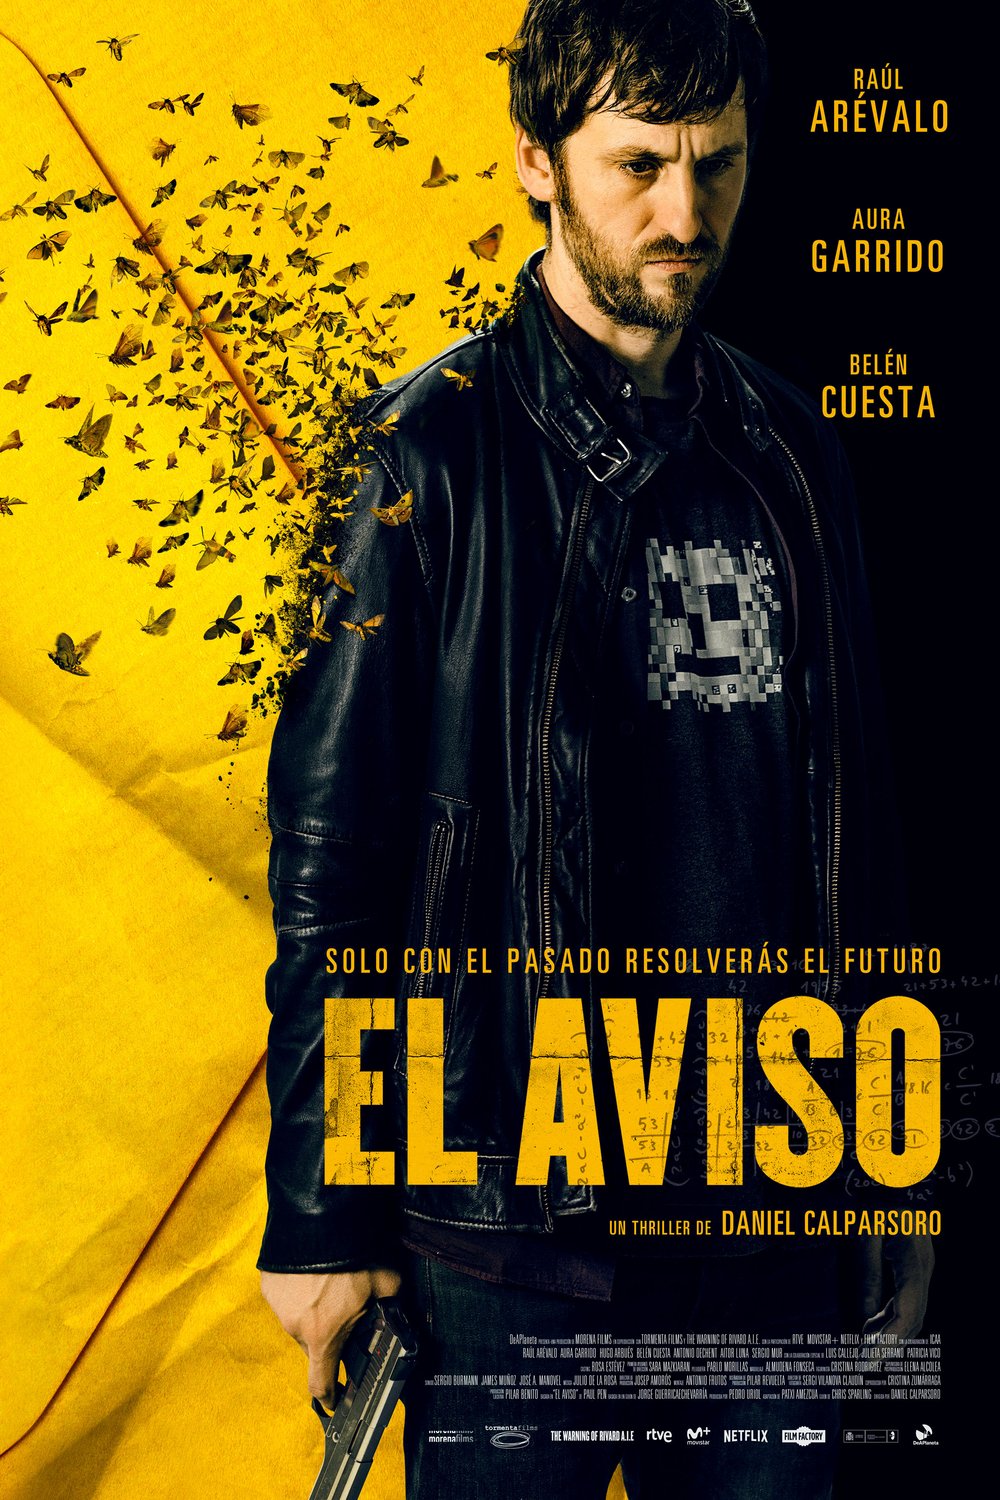 Spanish poster of the movie The Warning